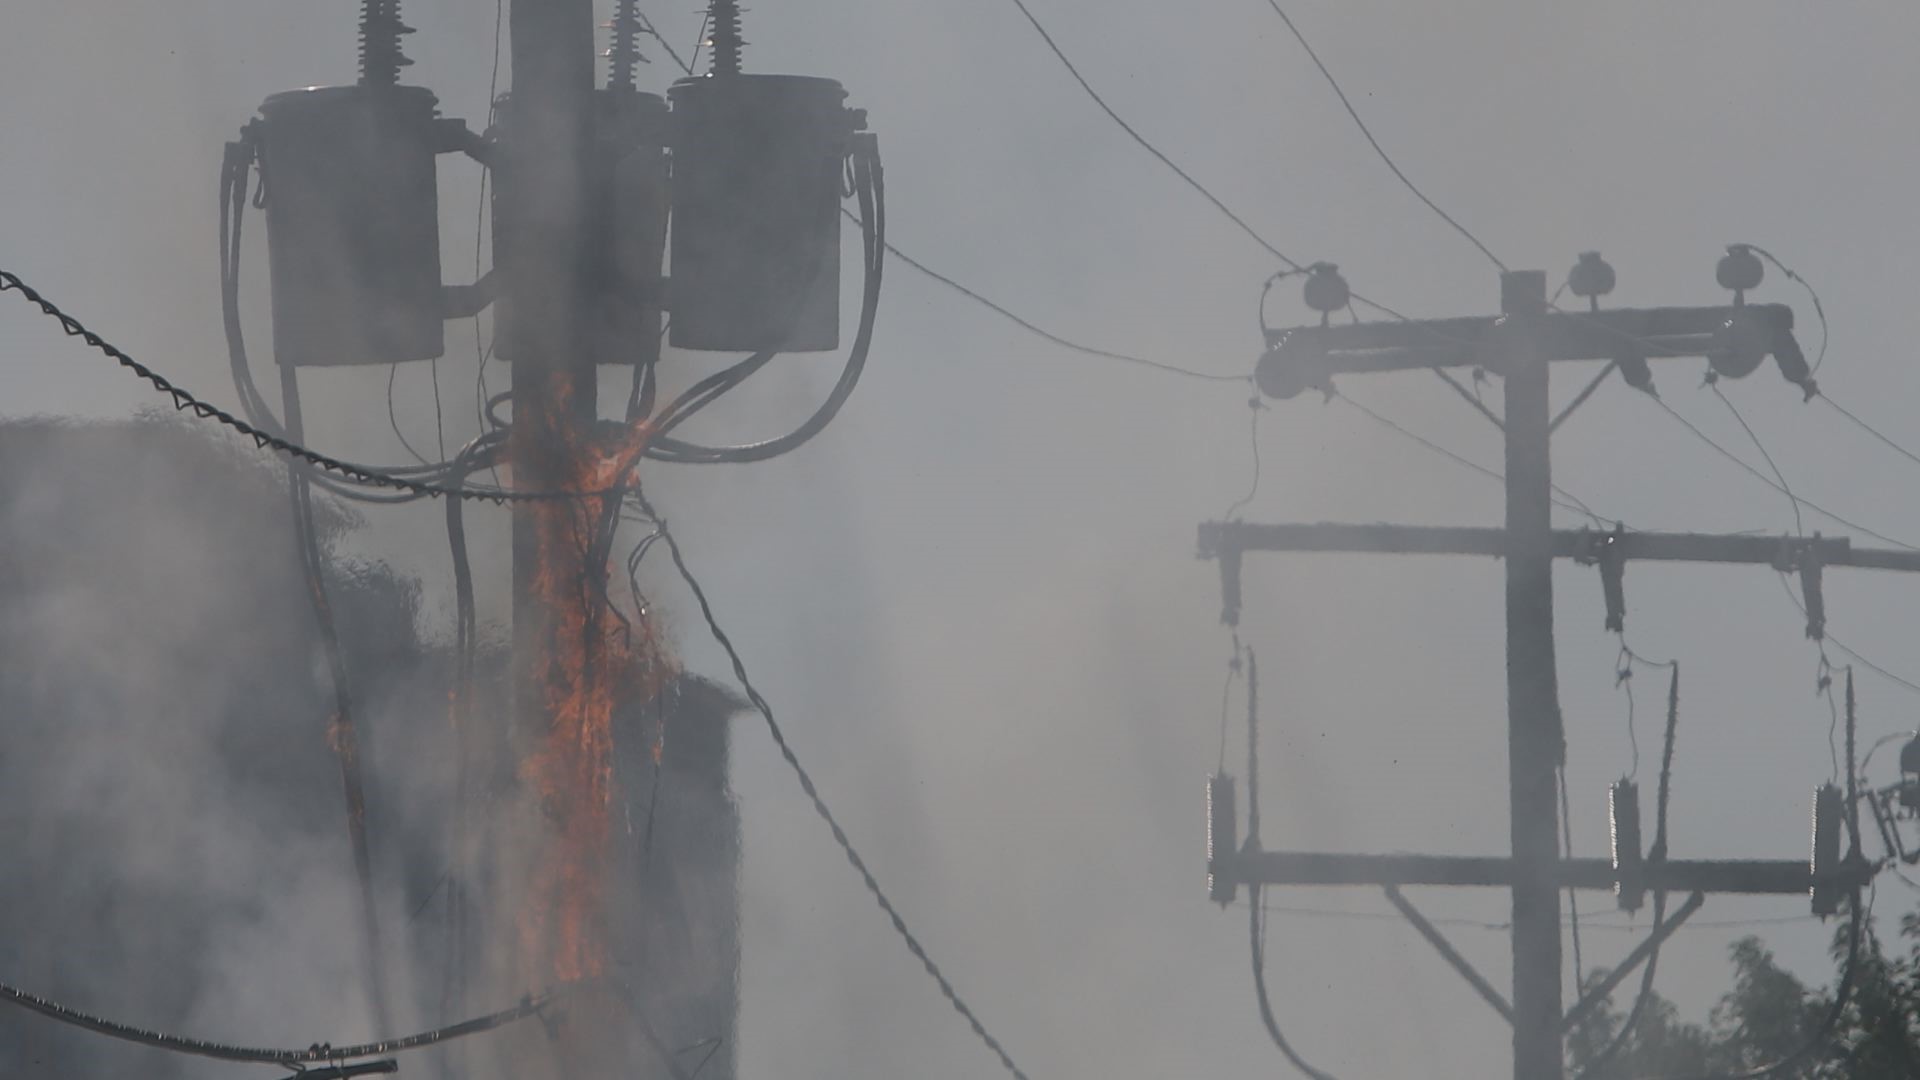 An outdoor electrical fire caused a lot of smoke, but fortunately little damage near the Roebuck Apartments and PETA headquarters in Norfolk on Monday morning.